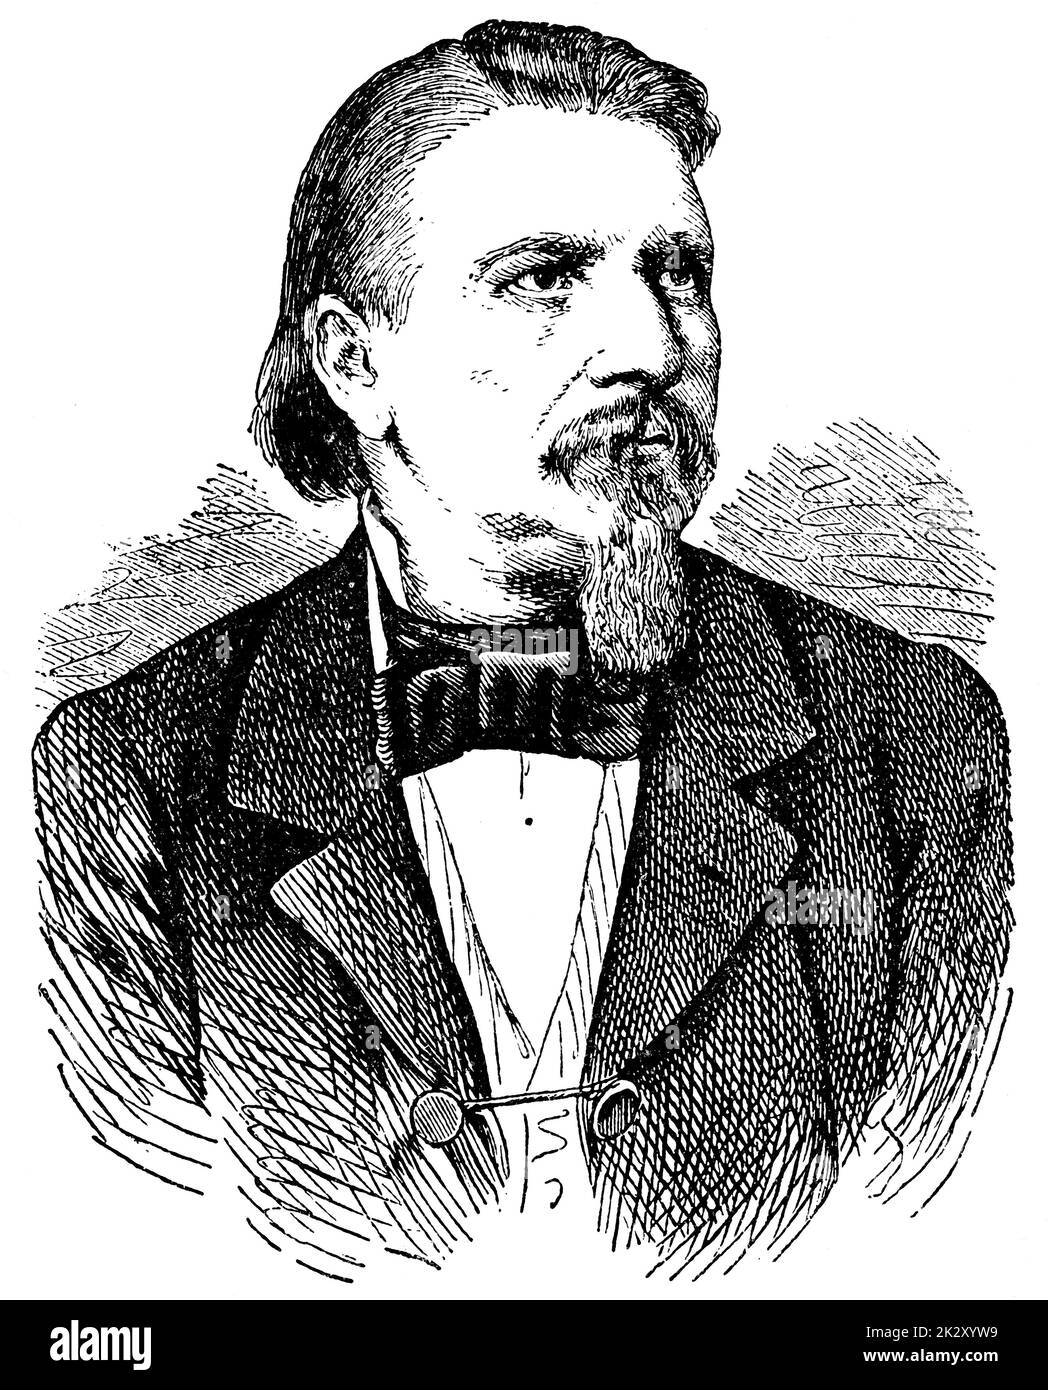 Portrait of Karl Gutzkow -a German writer notable in the Young Germany movement of the mid-19th century. Illustration of the 19th century. White background. Stock Photo